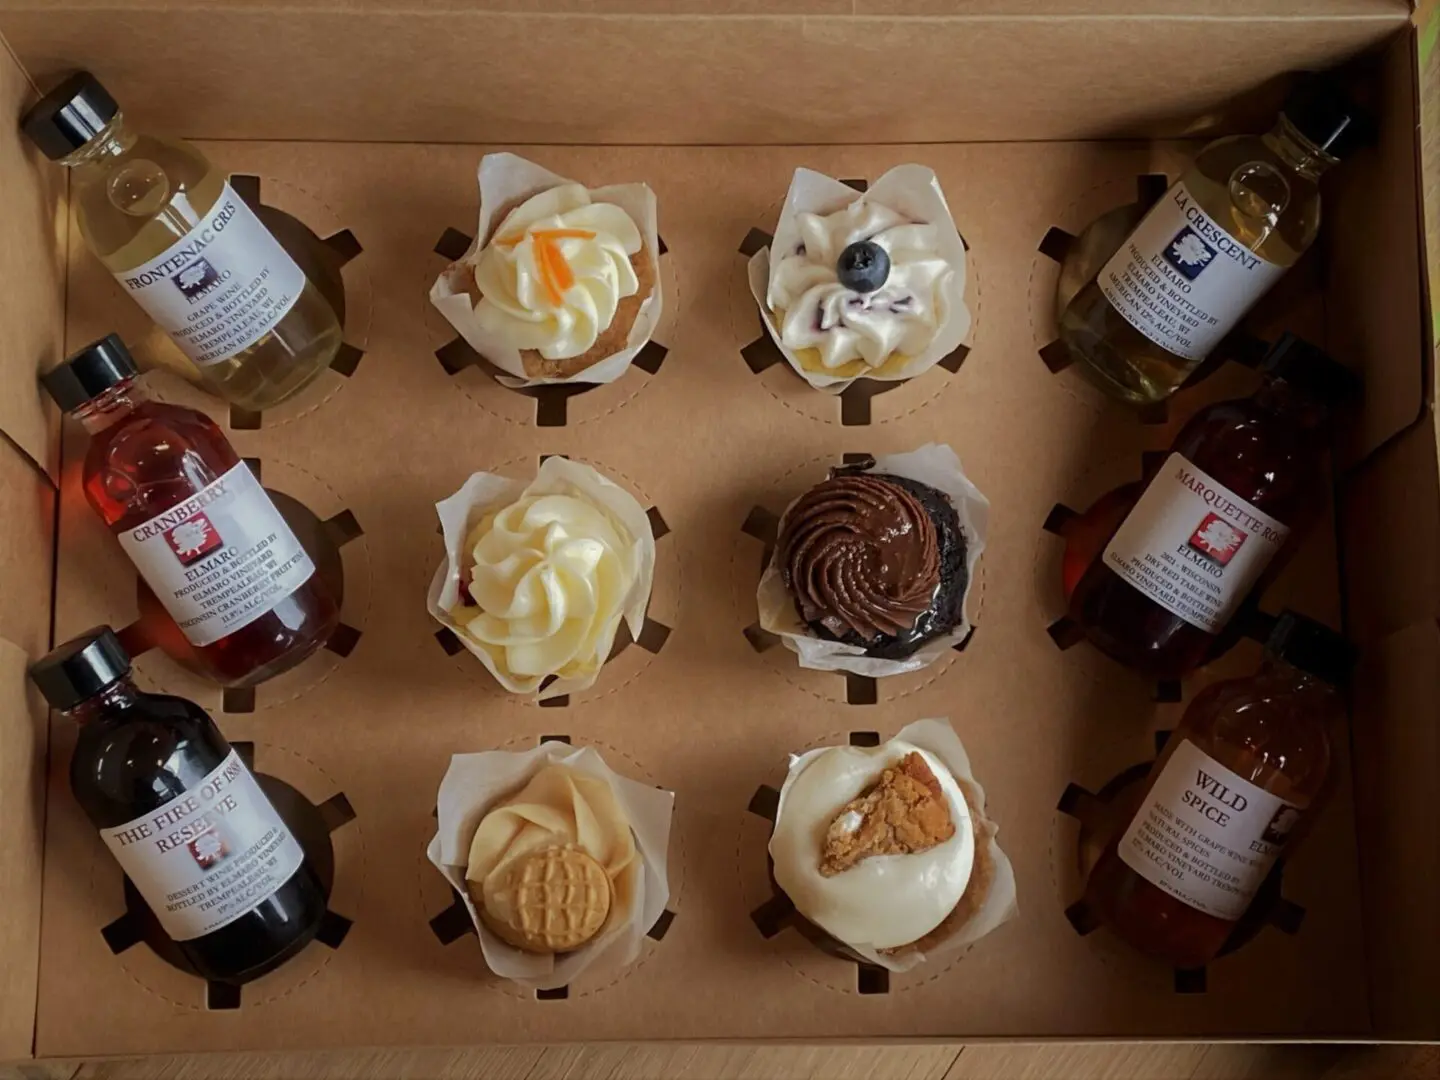 A box filled with cupcakes and a bottle of syrup.